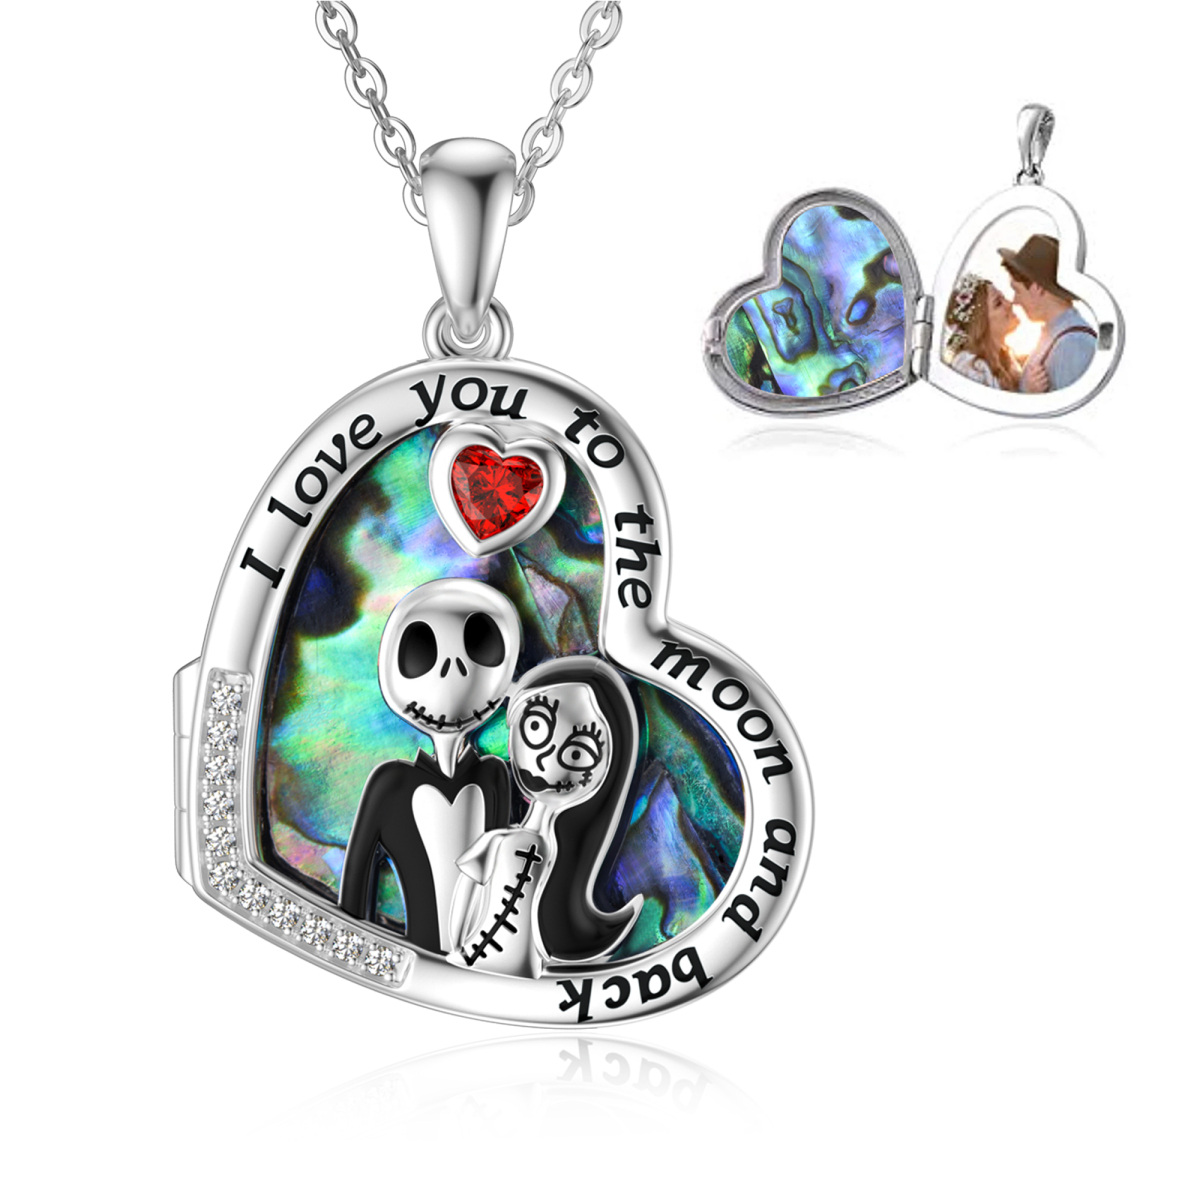 Sterling Silver Heart Abalone Shellfish Skull Personalized Photo Locket Necklace with Engraved Word-1